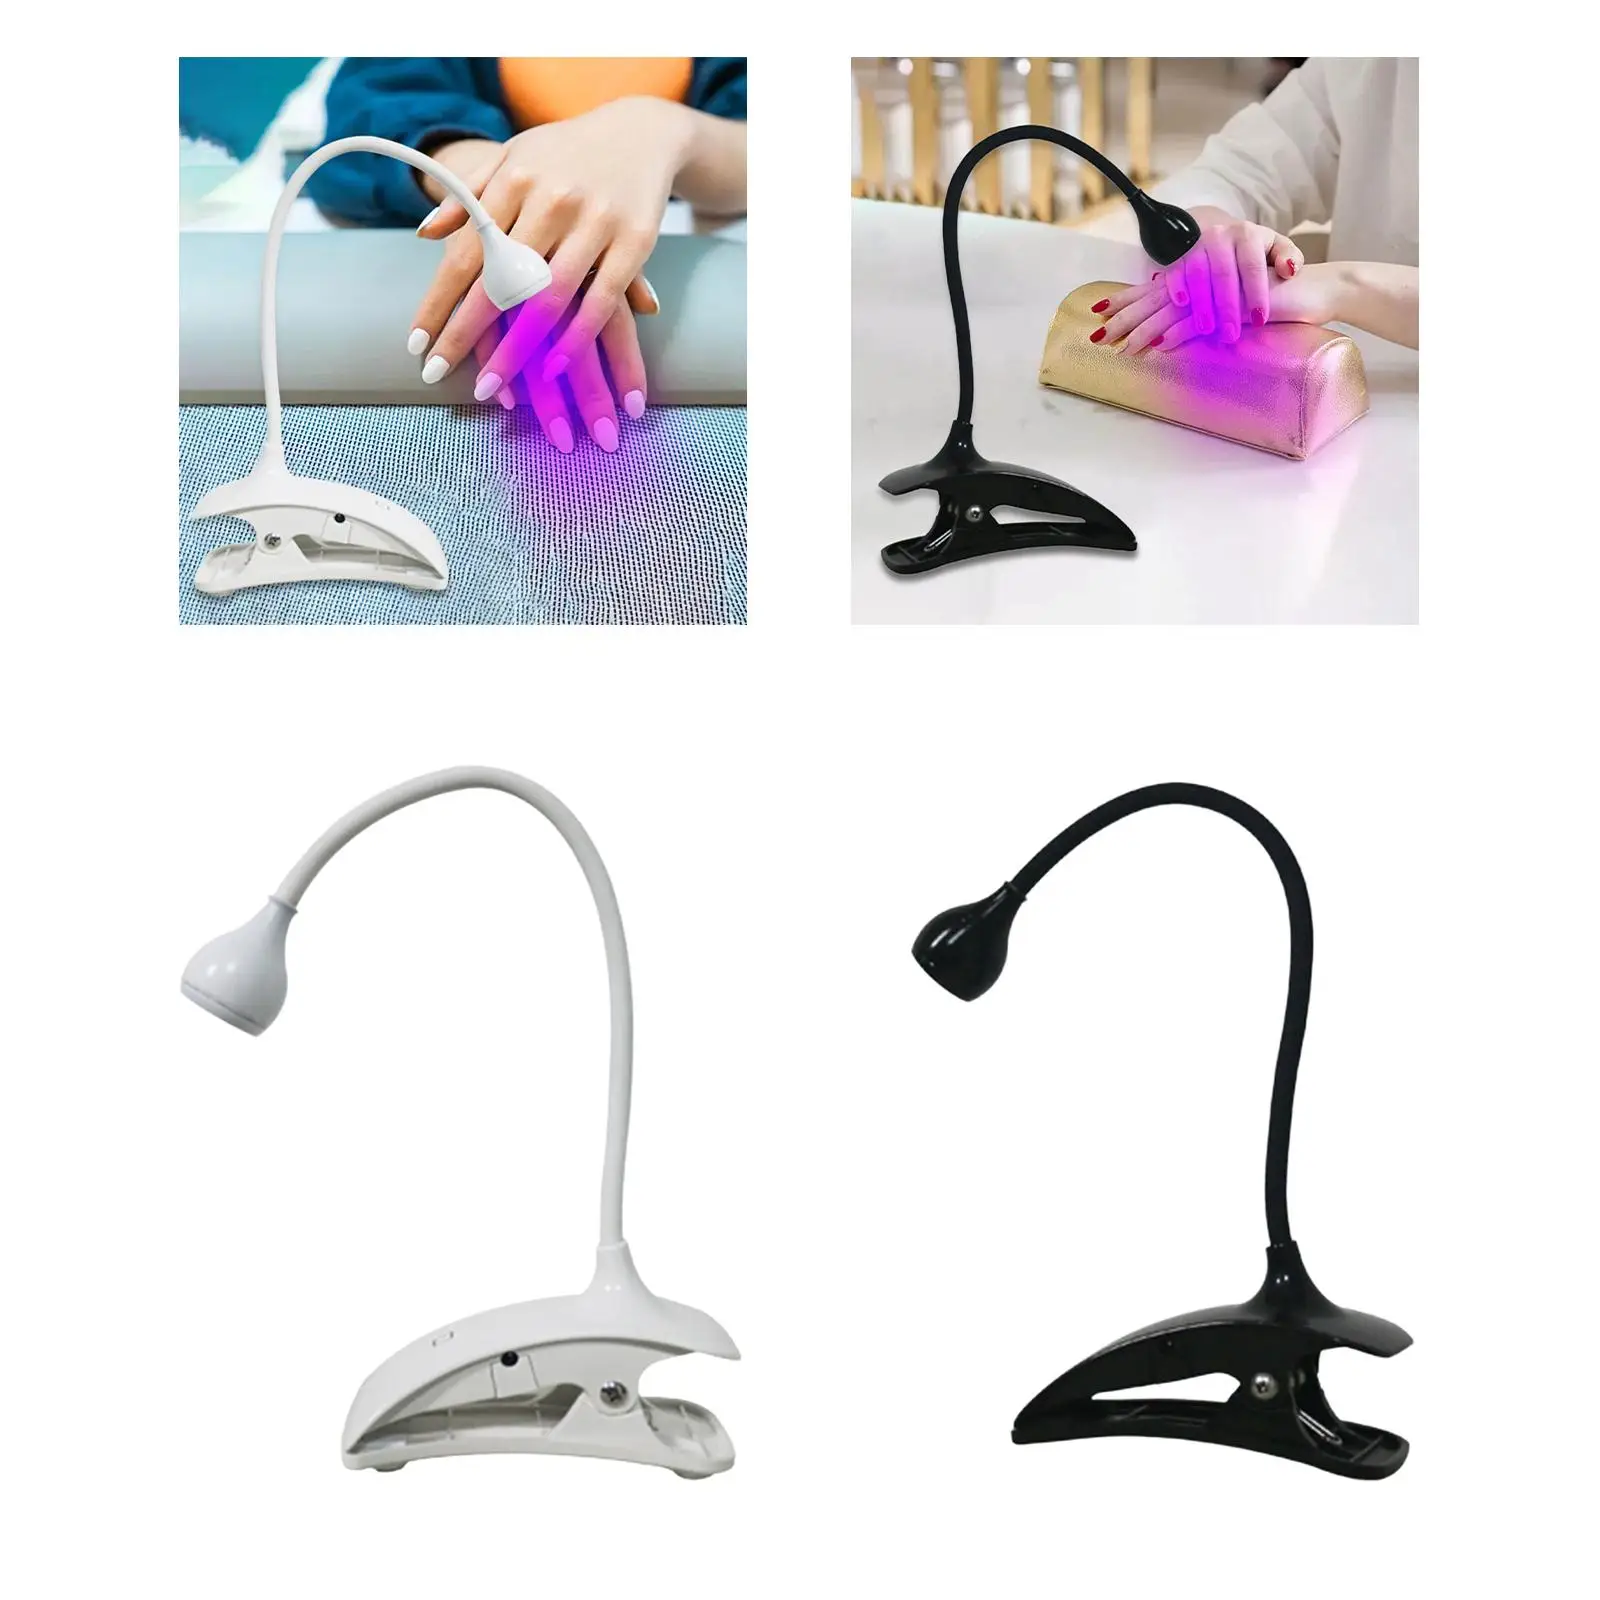 Nail Dryer 360 Degree Adjustable Professional with Clamp Portable Manicure Lamp Nail Lamp for Nail Extension Acrylic False Nails